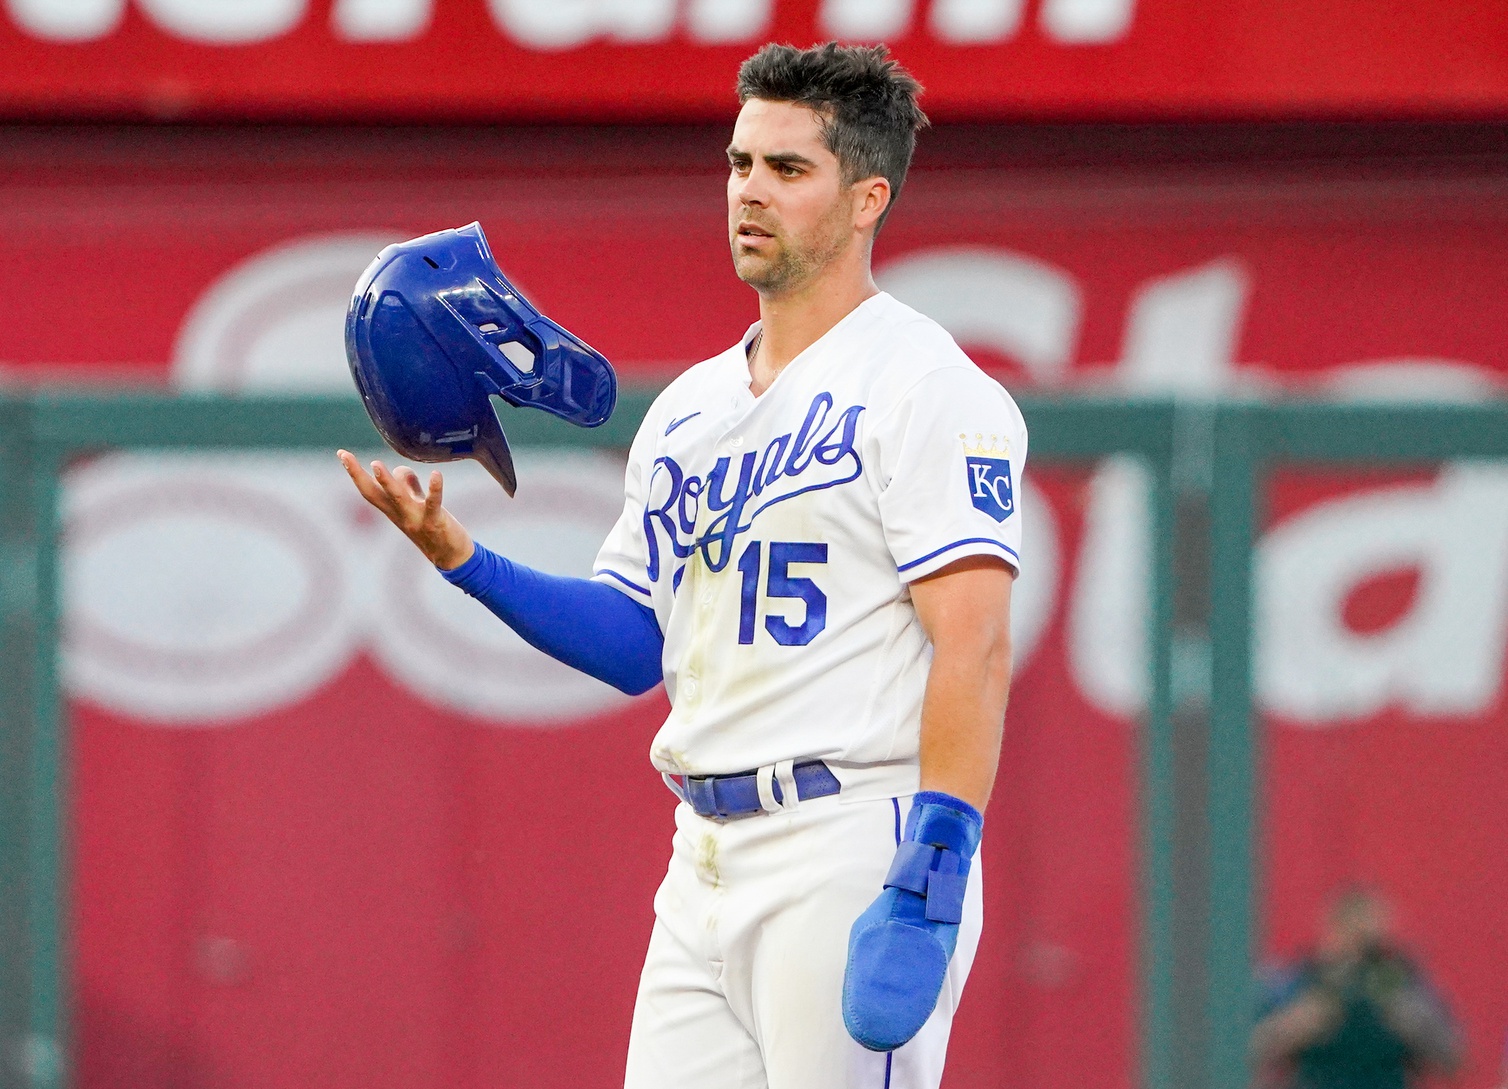 No Quit Whit (Whit Merrifield) Kansas City Royals - Officially Licen